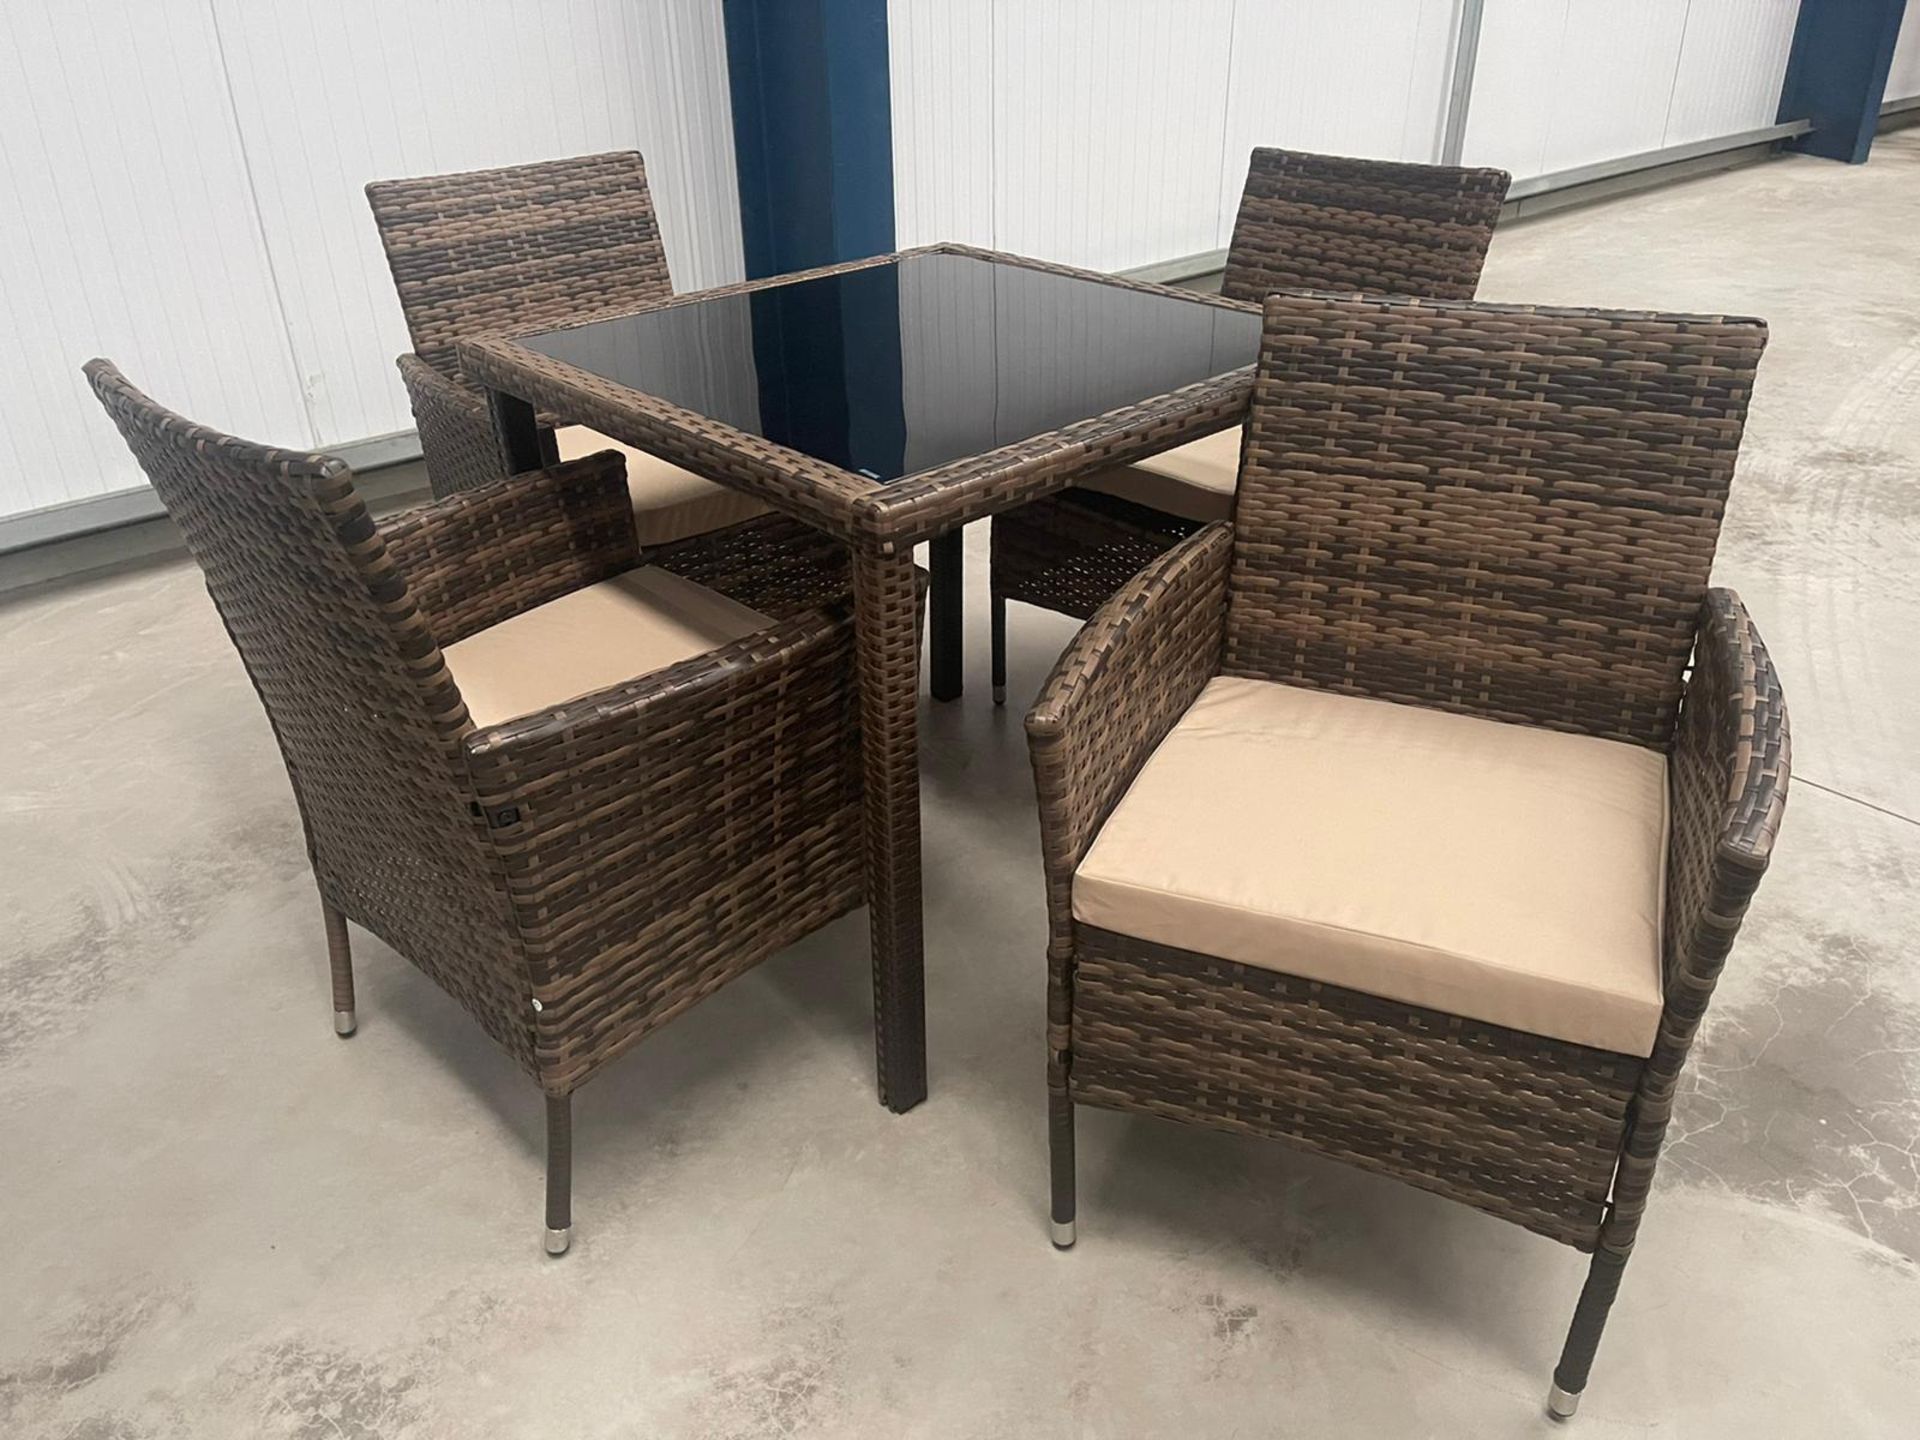 RRP £749 - NEW BROWN DINING SET WITH FOUR CHAIRS - LUXURY BLACK GLASS TOPPED DINING TABLE AND - Image 3 of 5